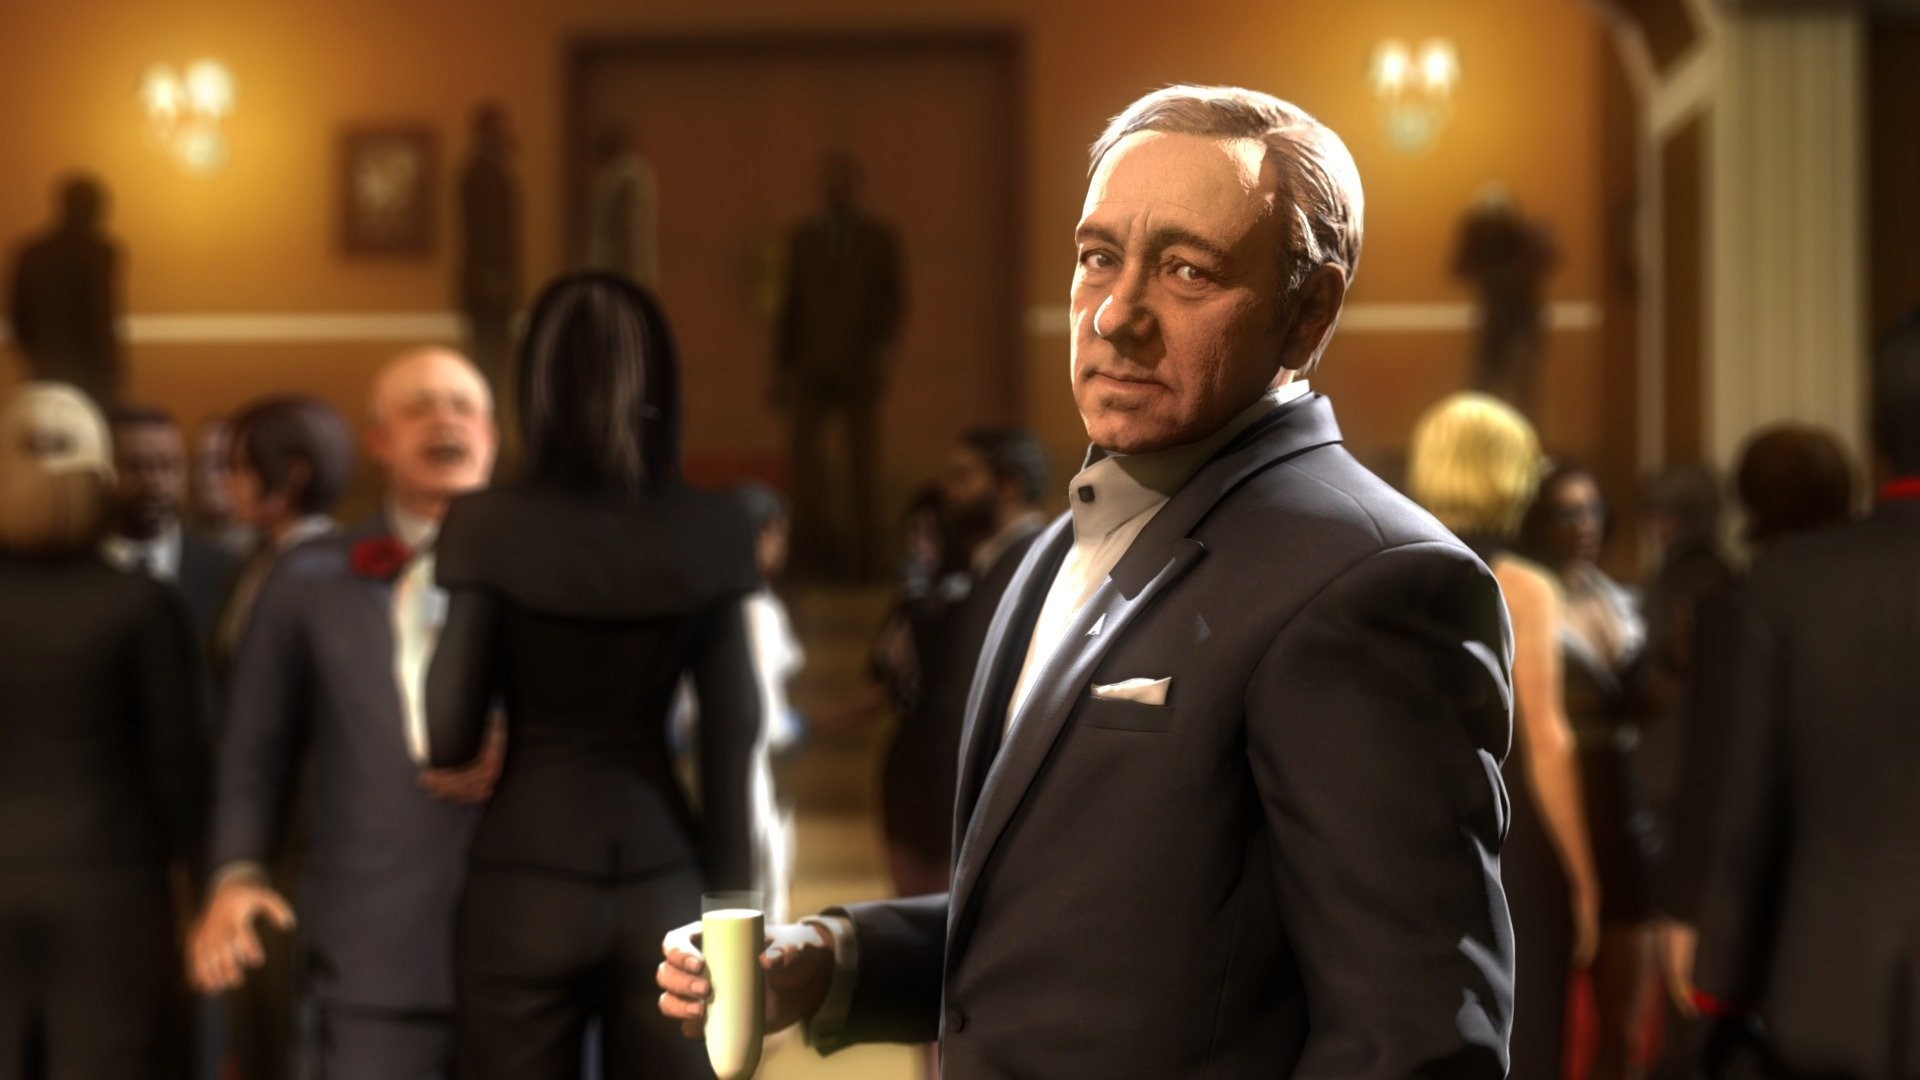 frank underwood house of cards fan art kevin spacey crossover garry's mod  jonathan irons call of